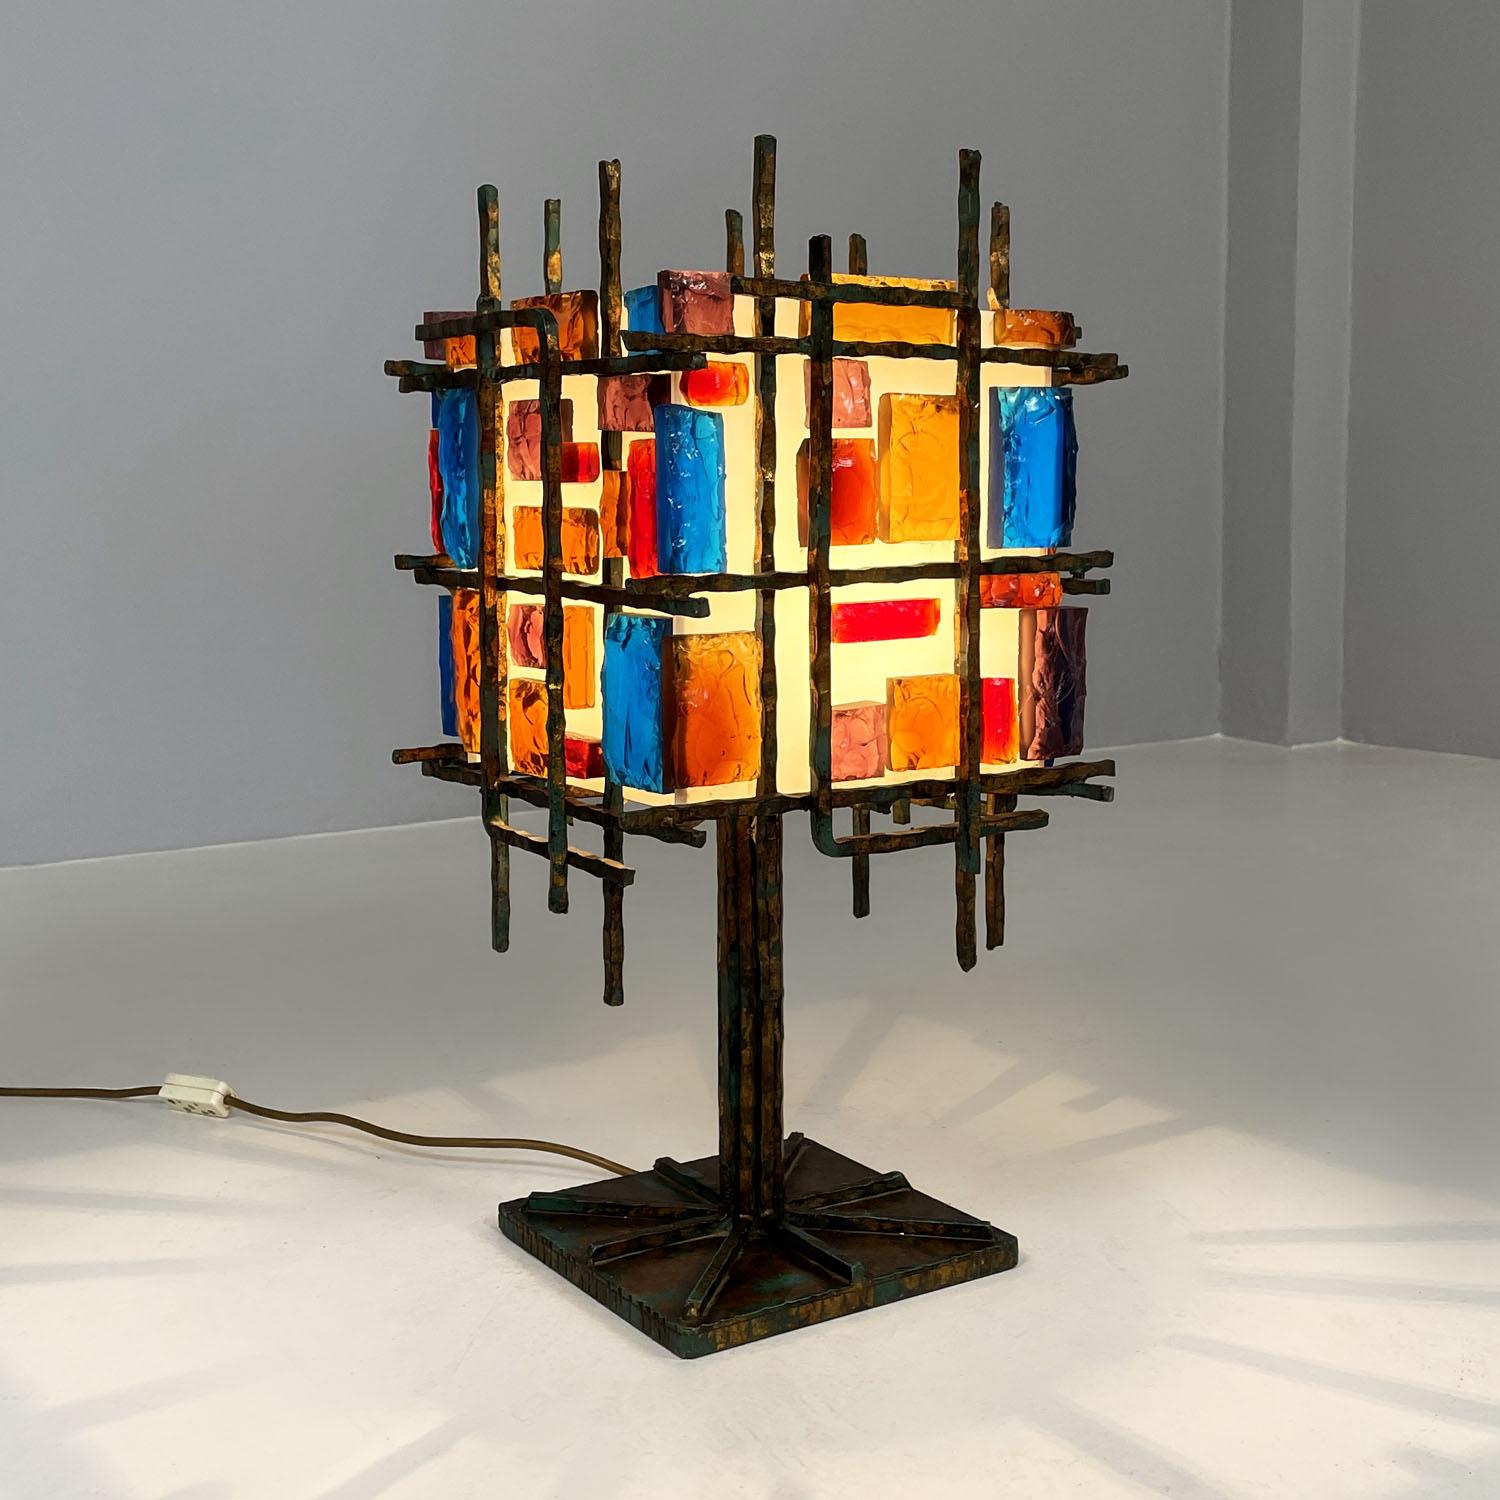 Italian brutalist geometric brass and colored glass table lamp, 1950s
Brutalist style table lamp. The square base and the main structure are made of brass, with geometric and material shapes which, especially in the upper part, meet to form both